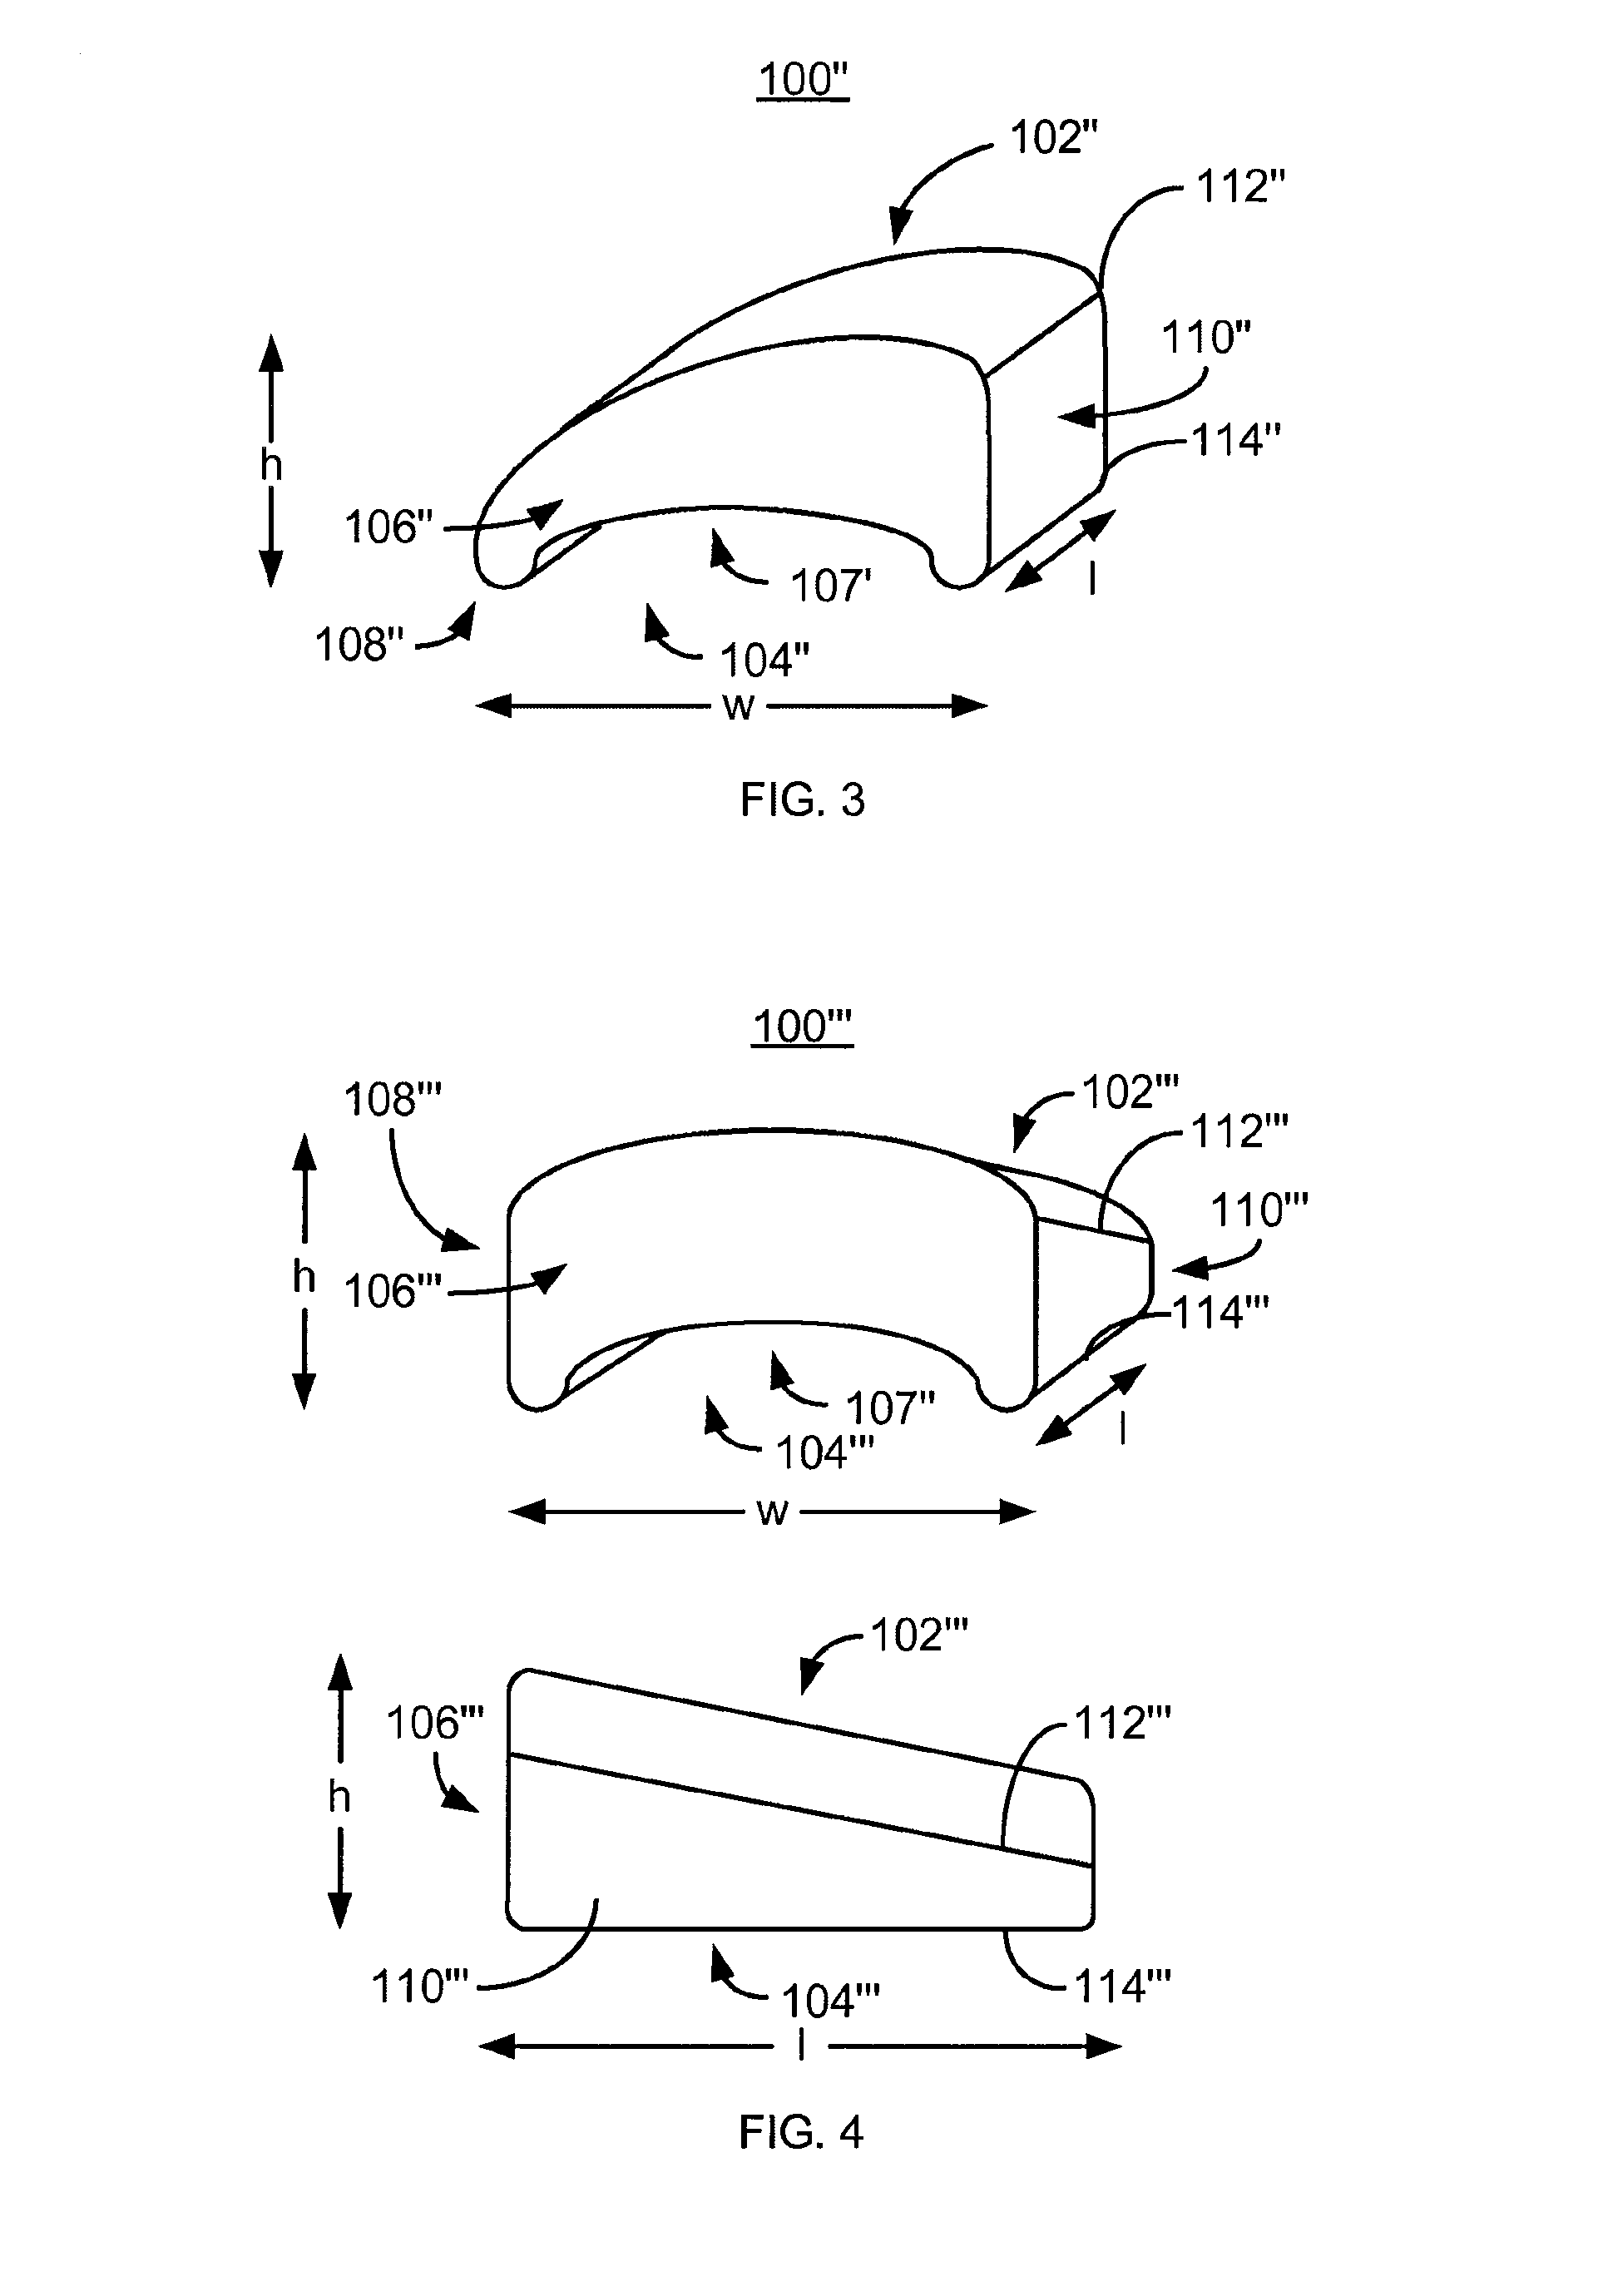 Method and System for Patella Realignment